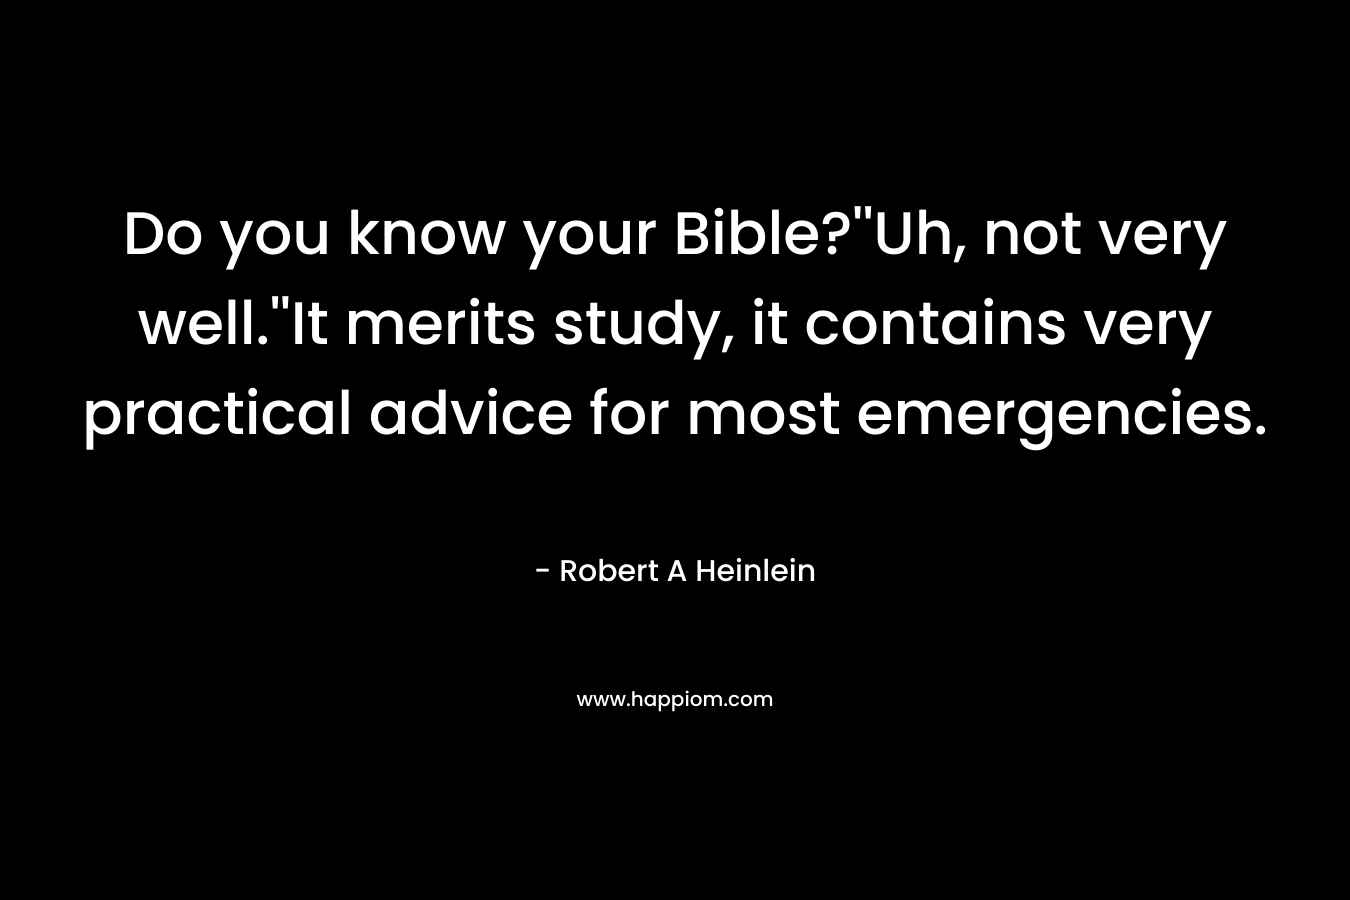 Do you know your Bible?”Uh, not very well.”It merits study, it contains very practical advice for most emergencies. – Robert A Heinlein